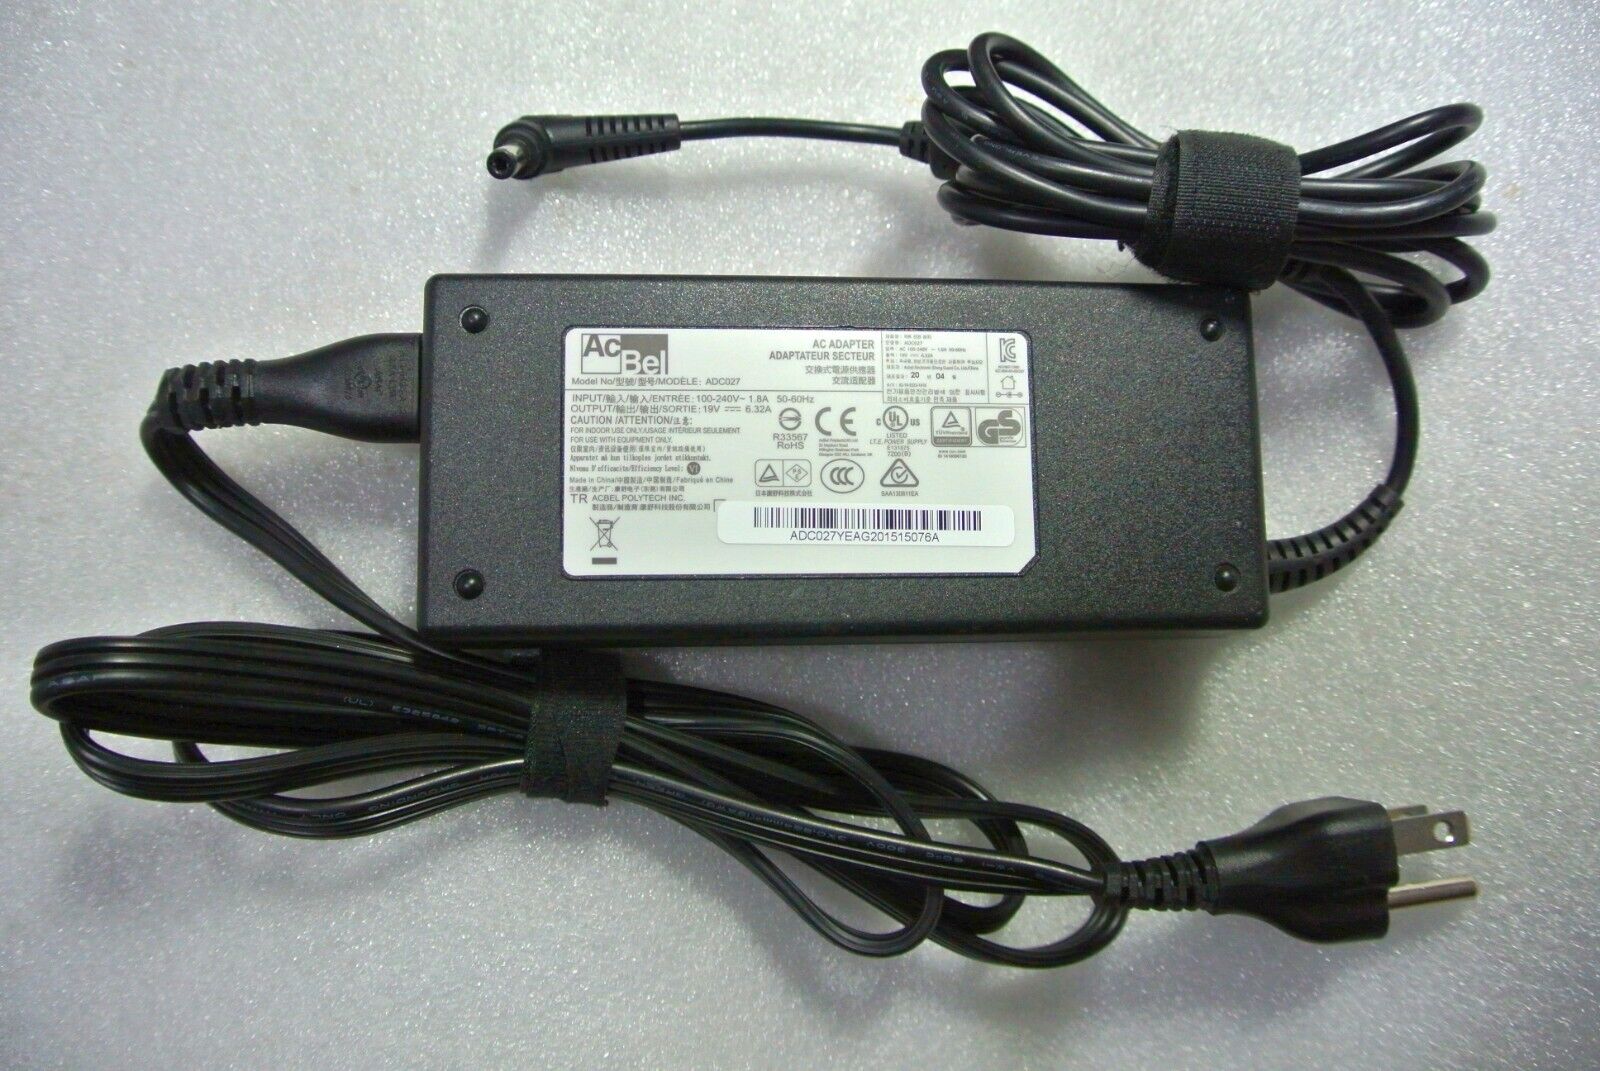 Genuine AcBel AC Power Adapter Model ADC027 120W 19V 6.32A Power Supply Brand AcBel Compatible Brand For AcBel Type Pow